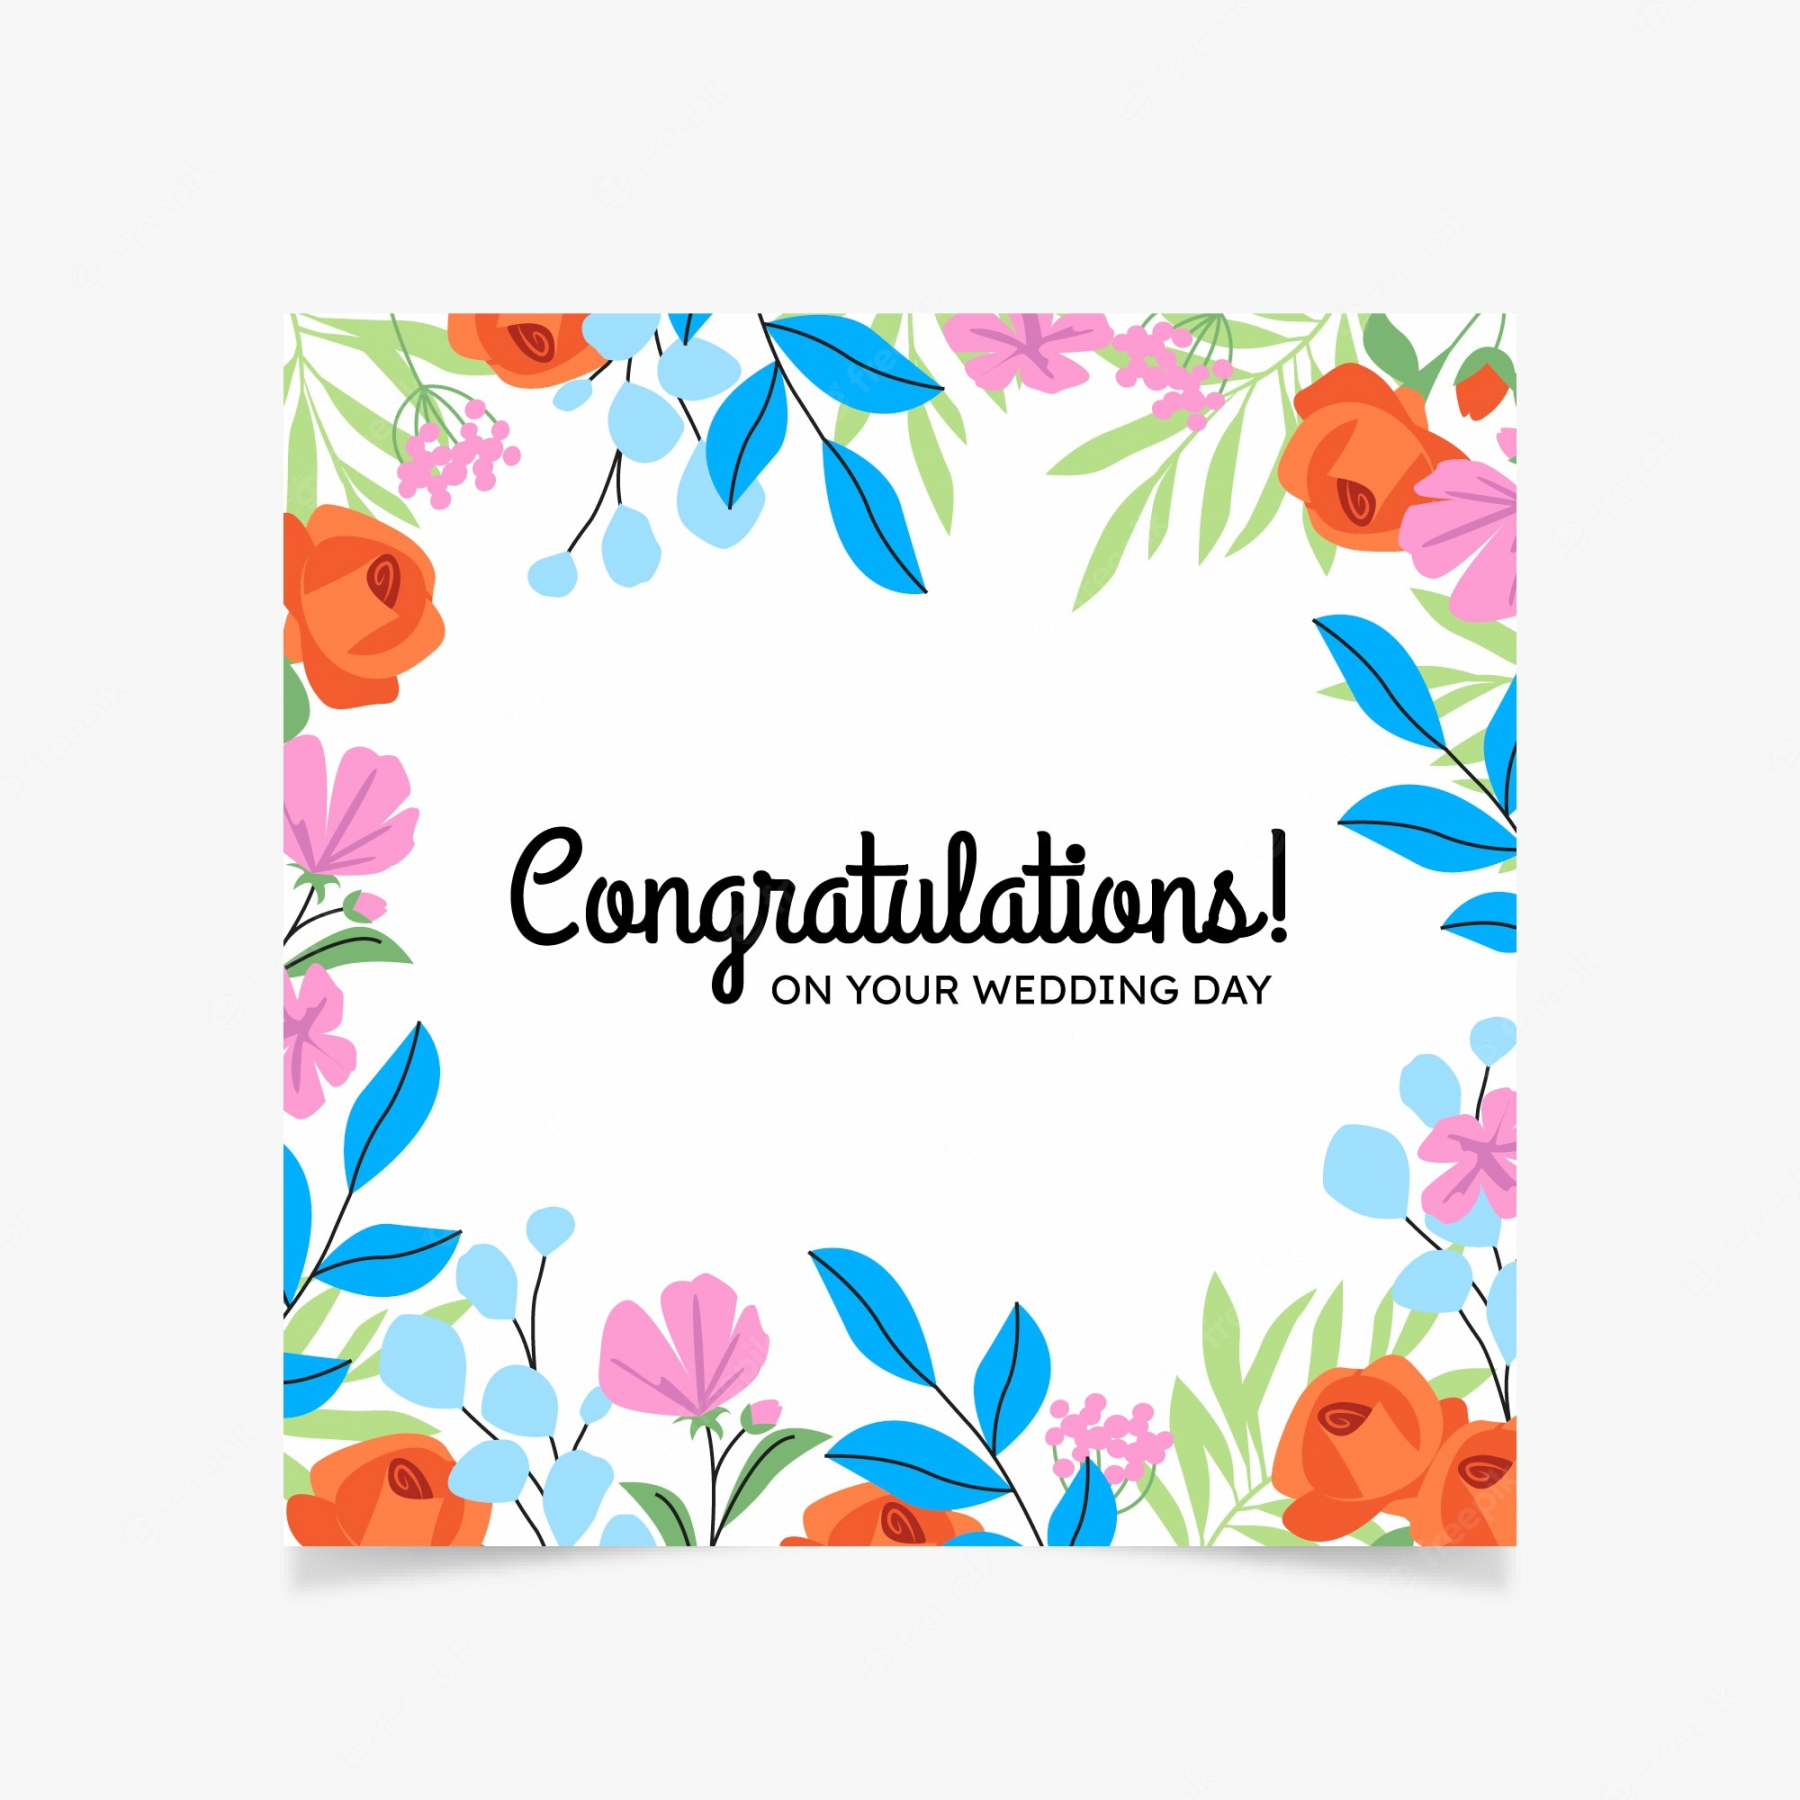 Congratulations Card Template - Free Vectors & PSDs to Download - FREE Printables - Congratulations Cards Printable Free